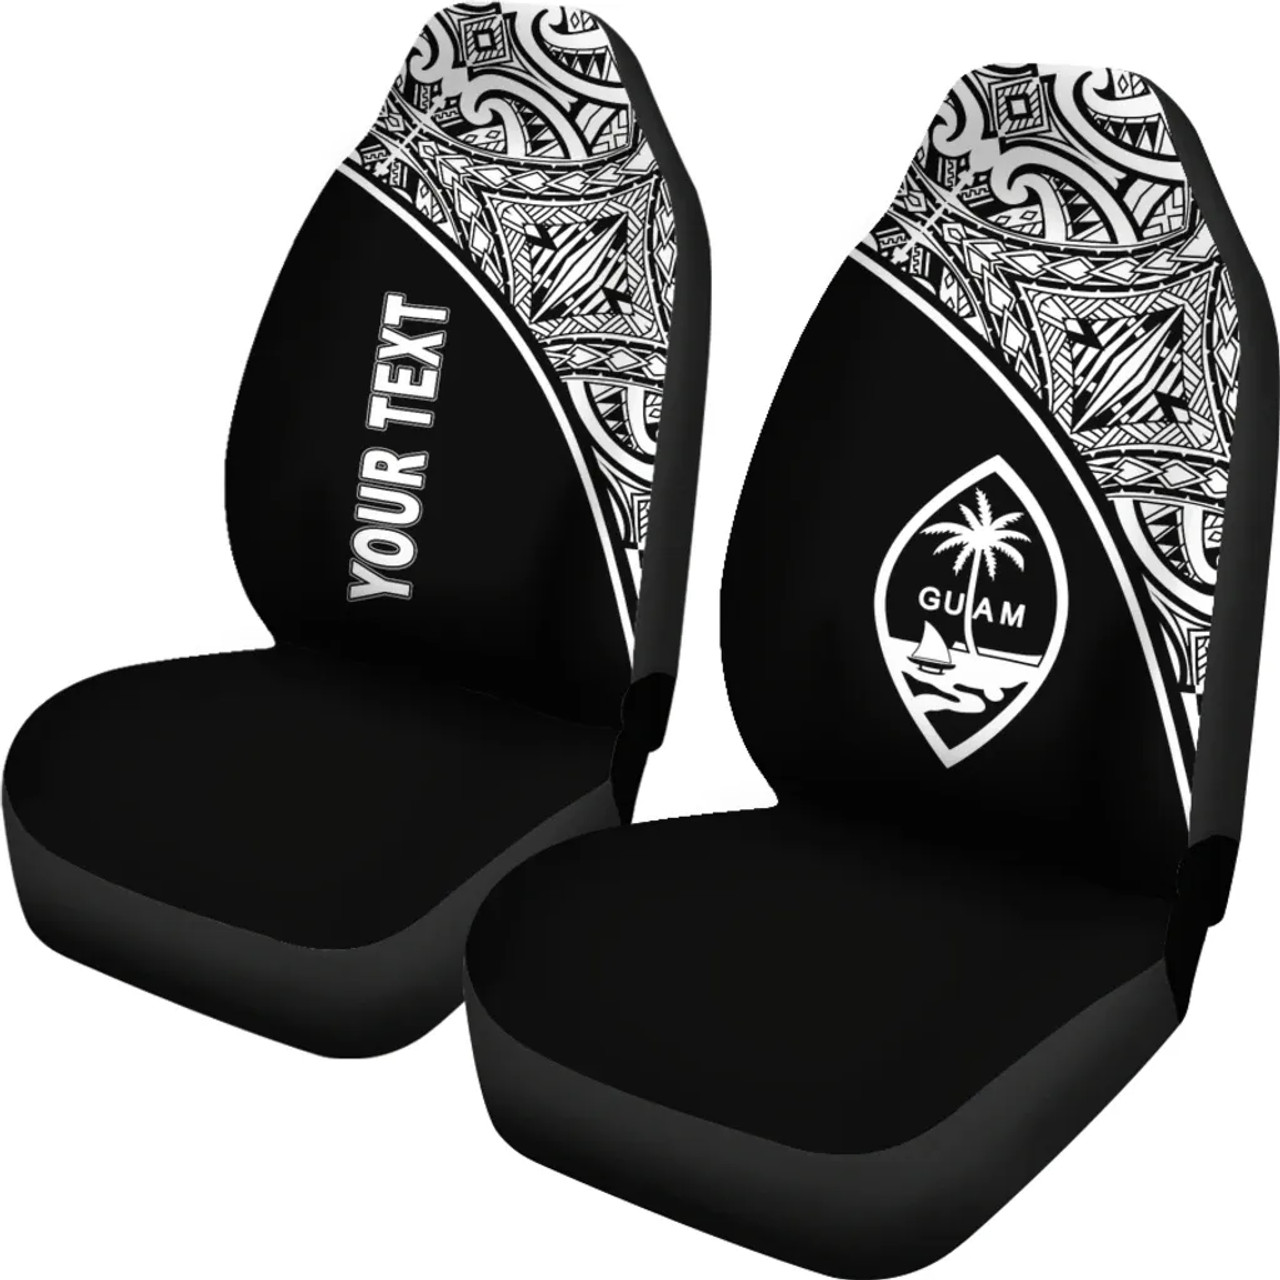 Federated States of Micronesia Car Seat Covers - FSM Seal Polynesian Black Curve